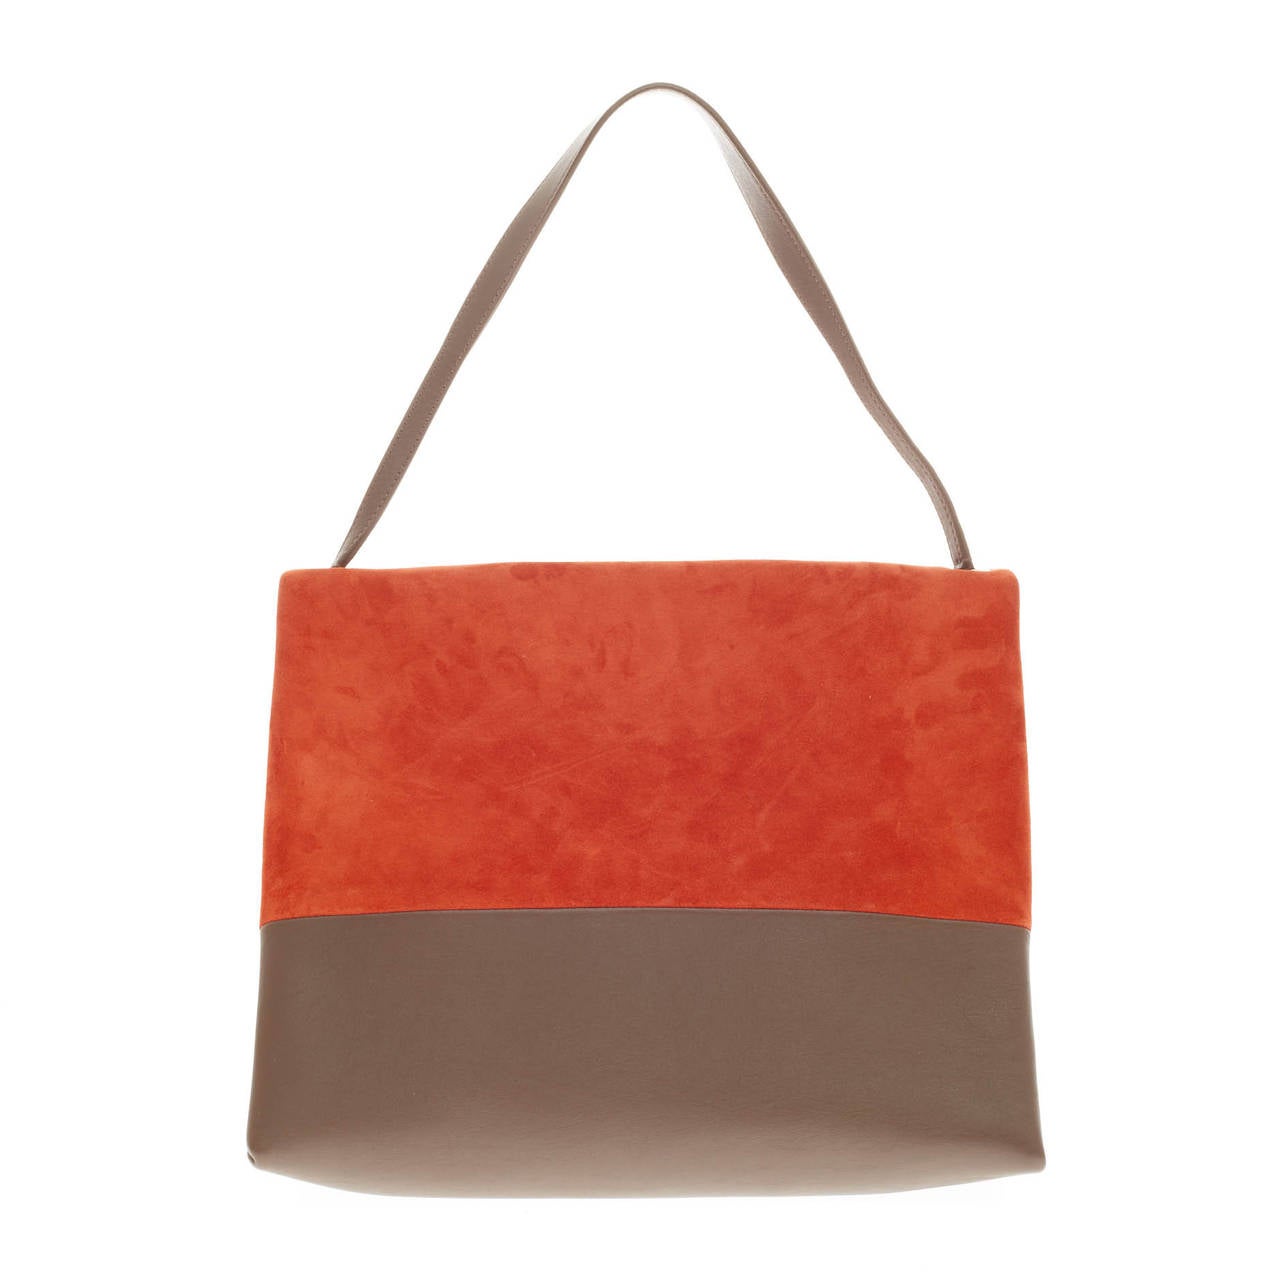 Women's Celine All Soft Tote Suede